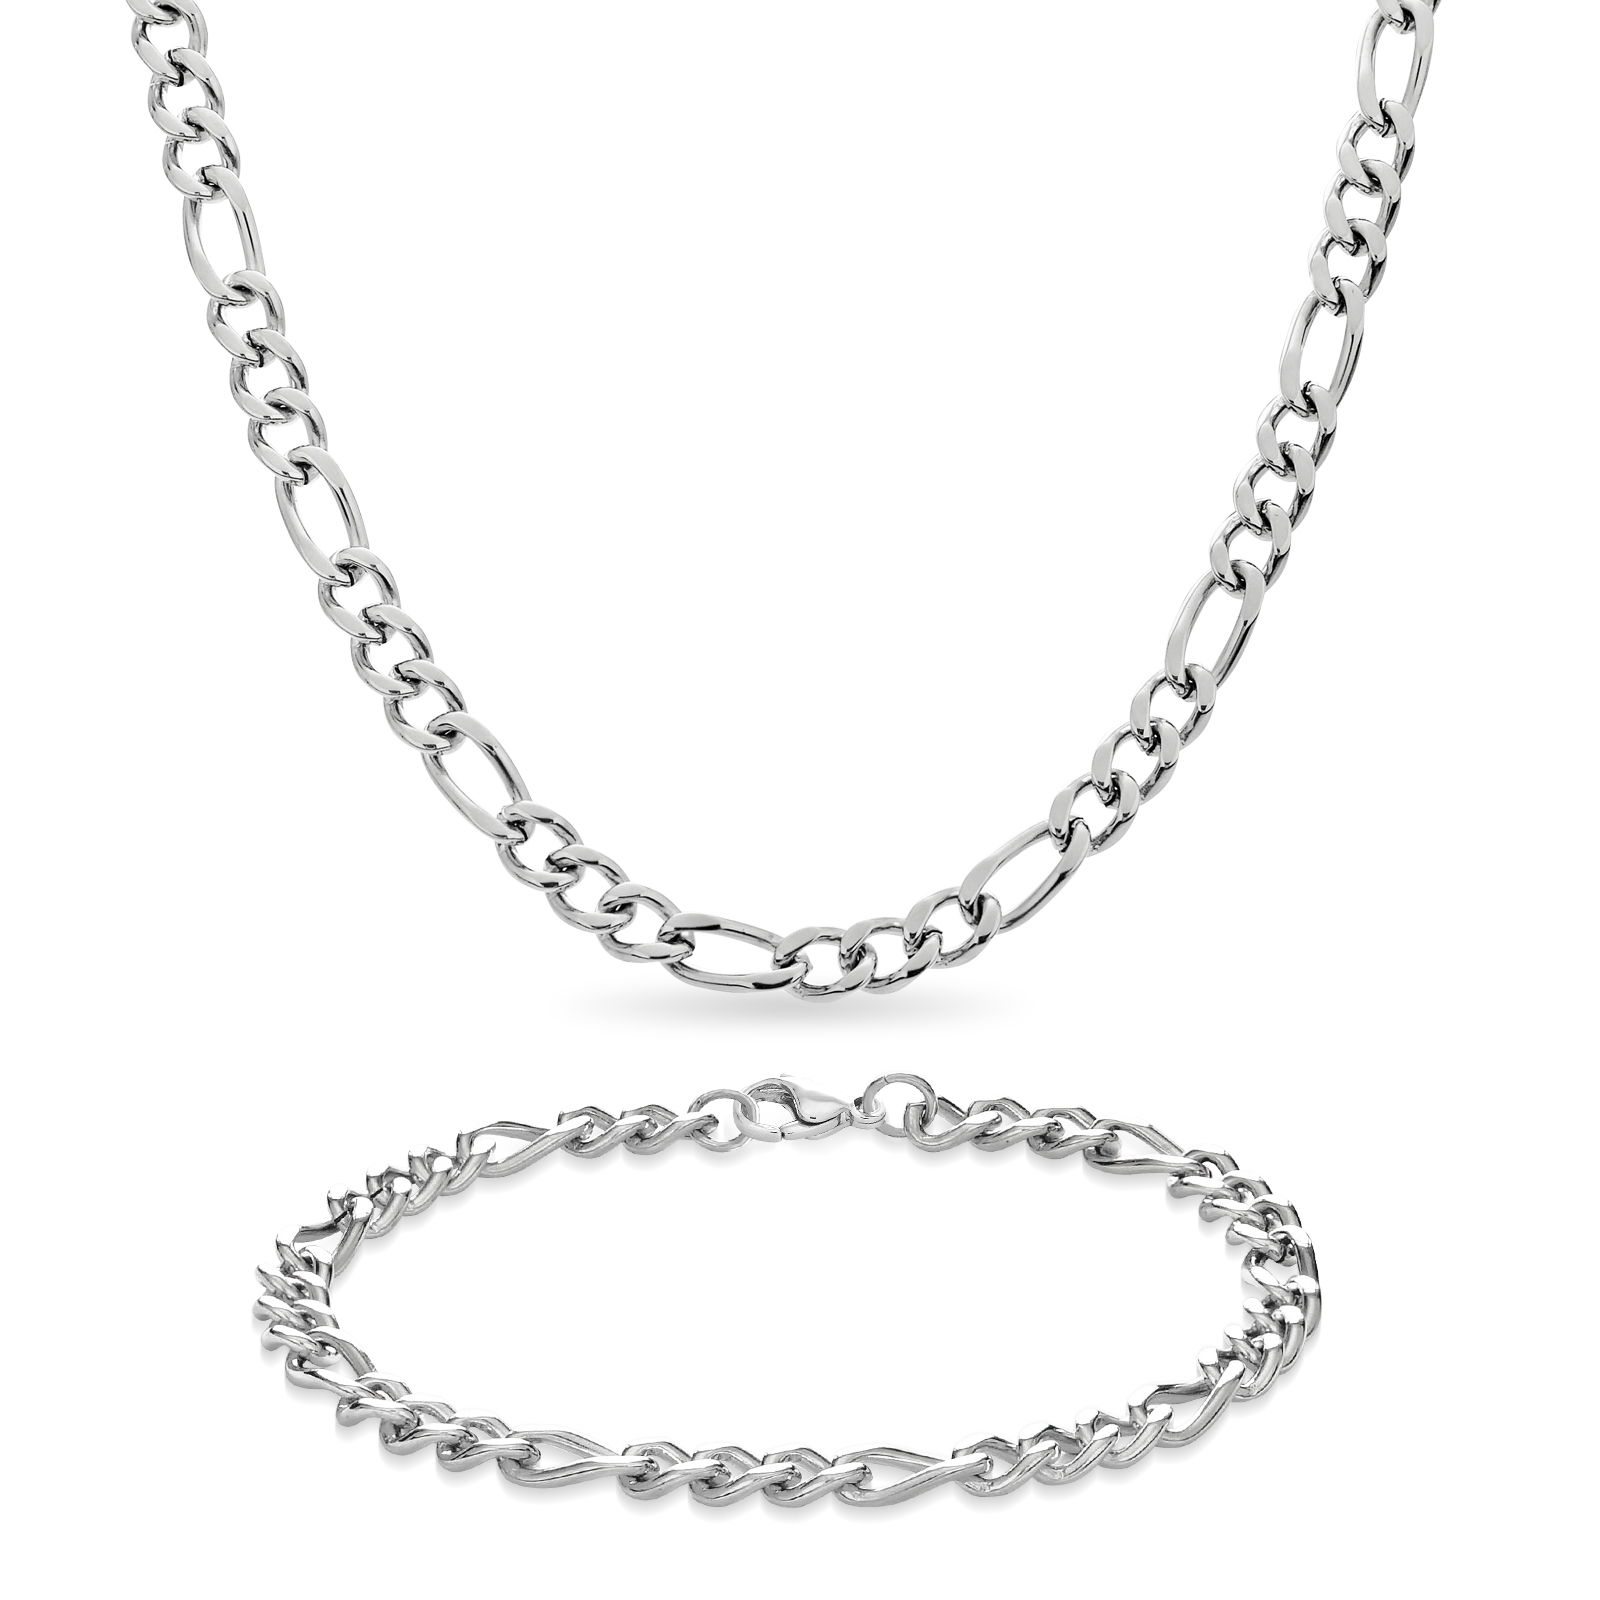 Stainless Steel Figaro Chain and Bracelet Two Piece Set